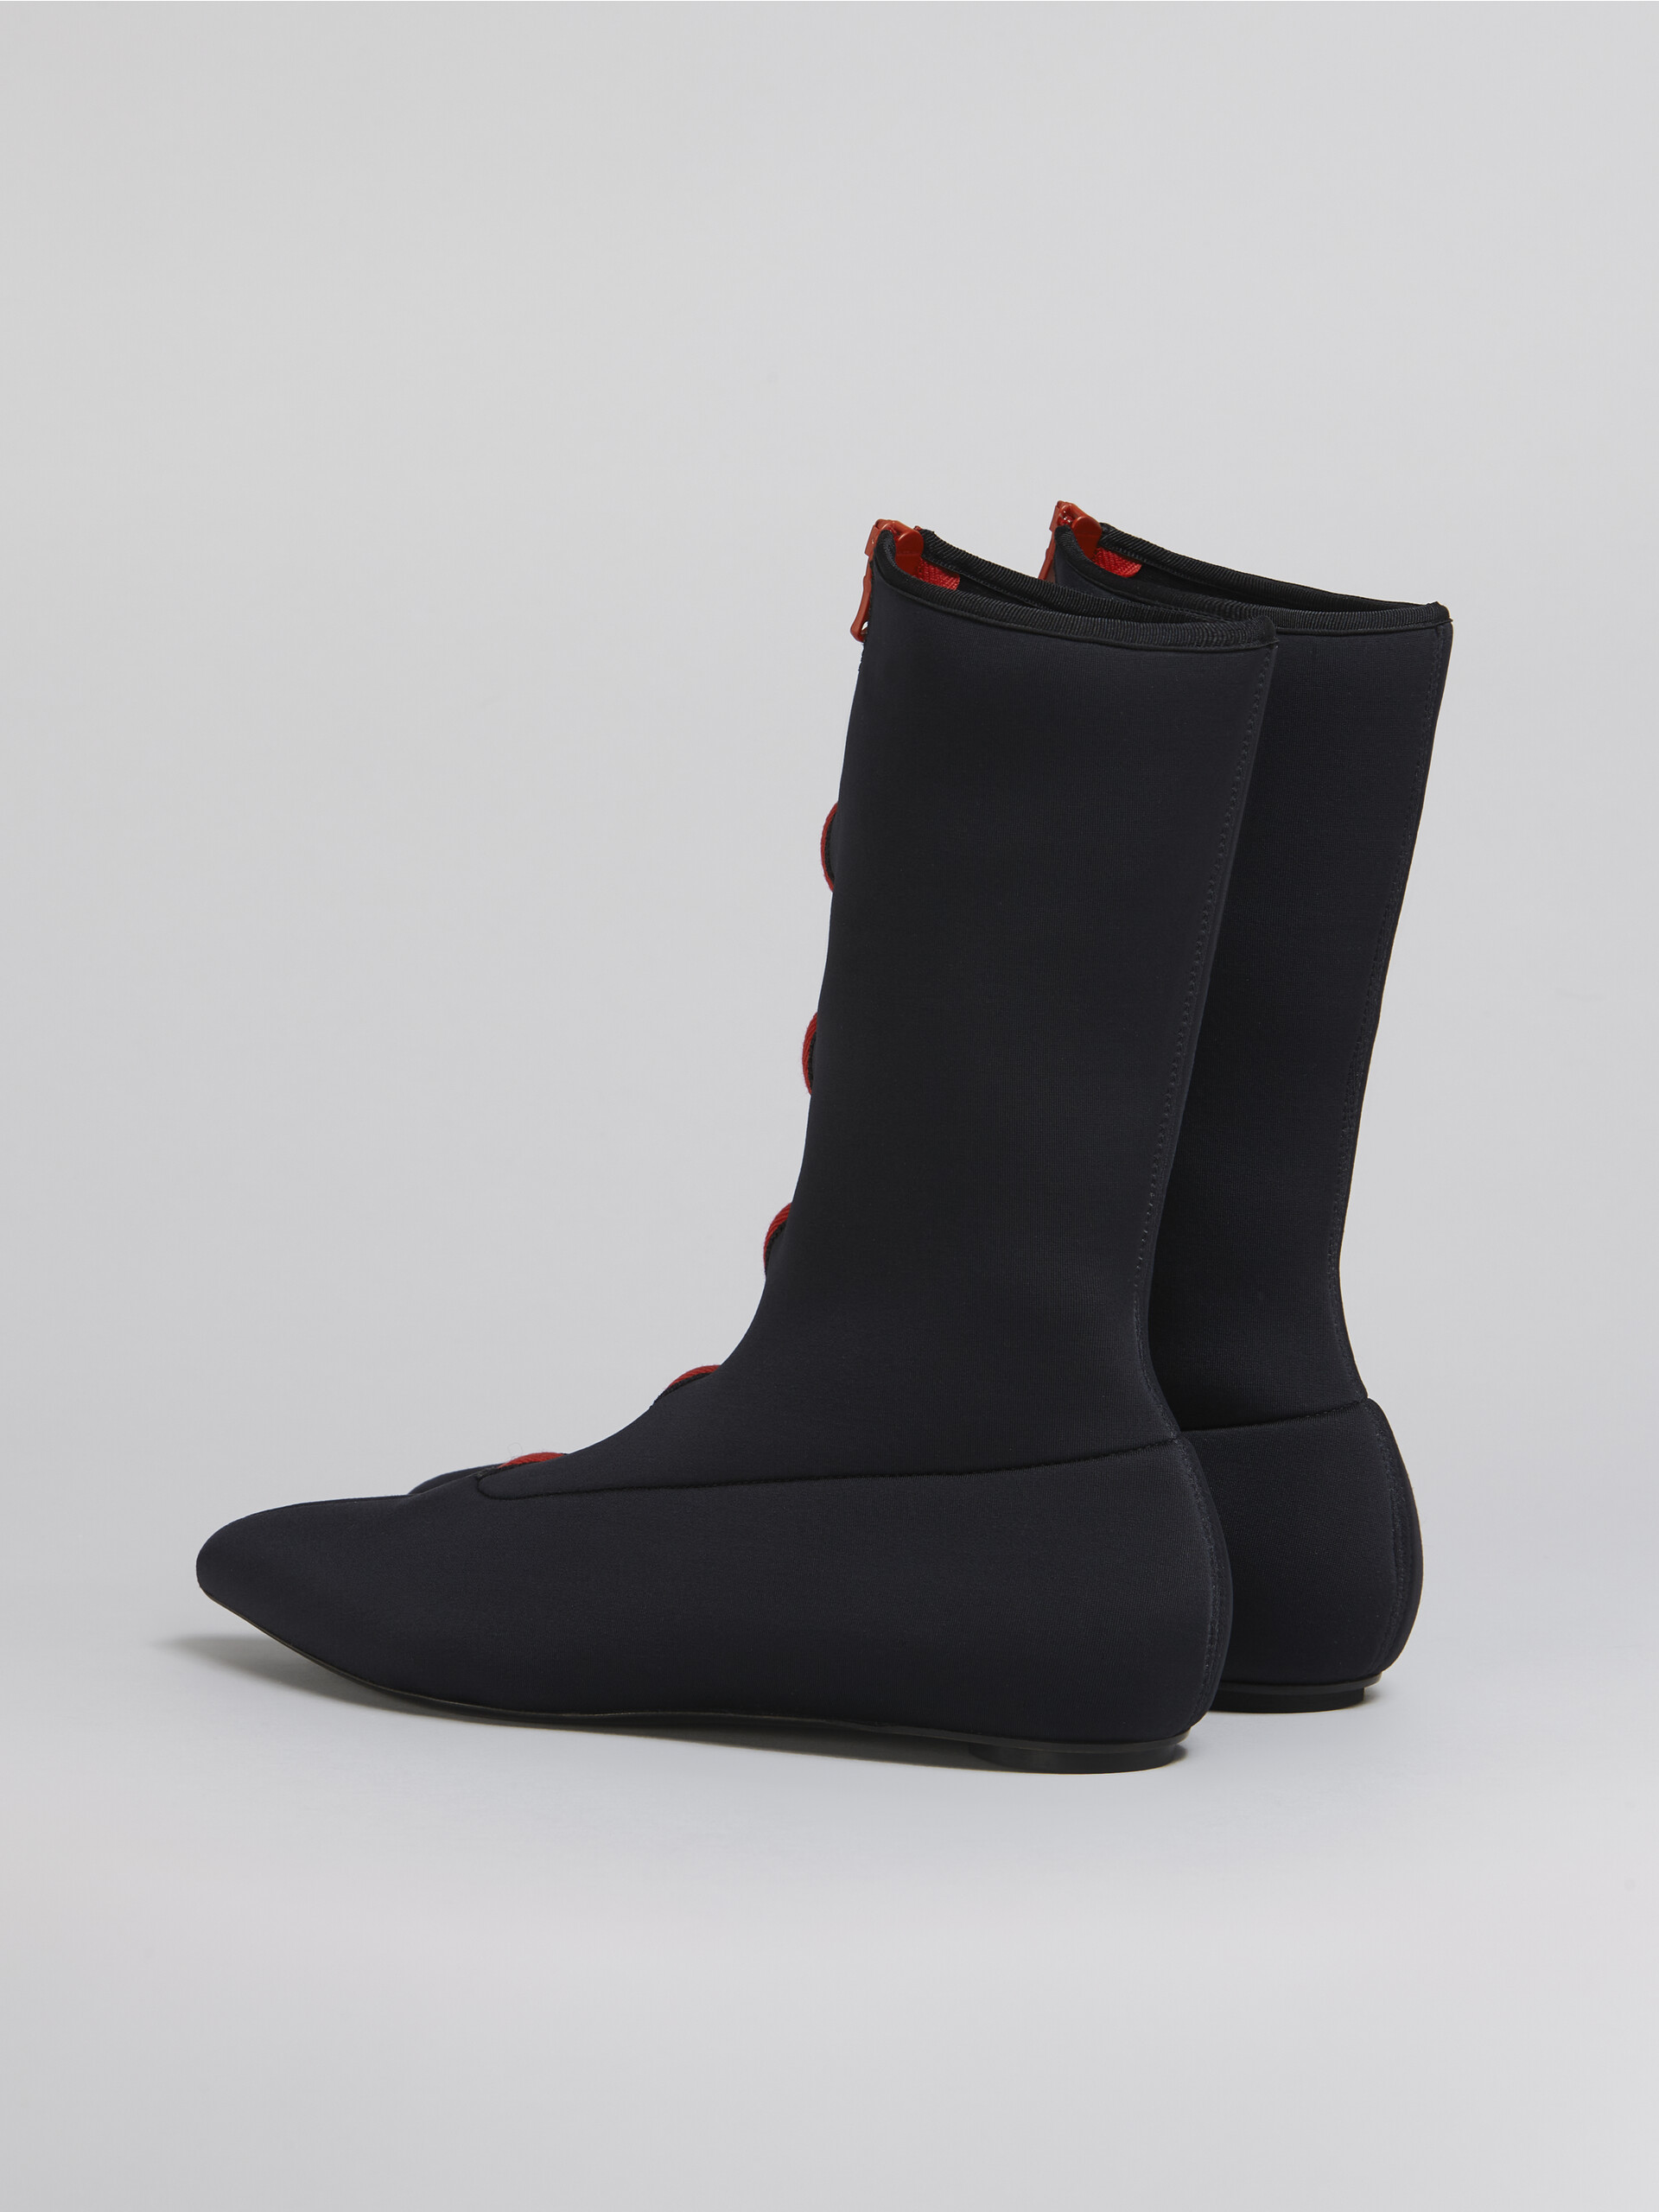 Pointed flat bootie in stretch neoprene - Boots - Image 3